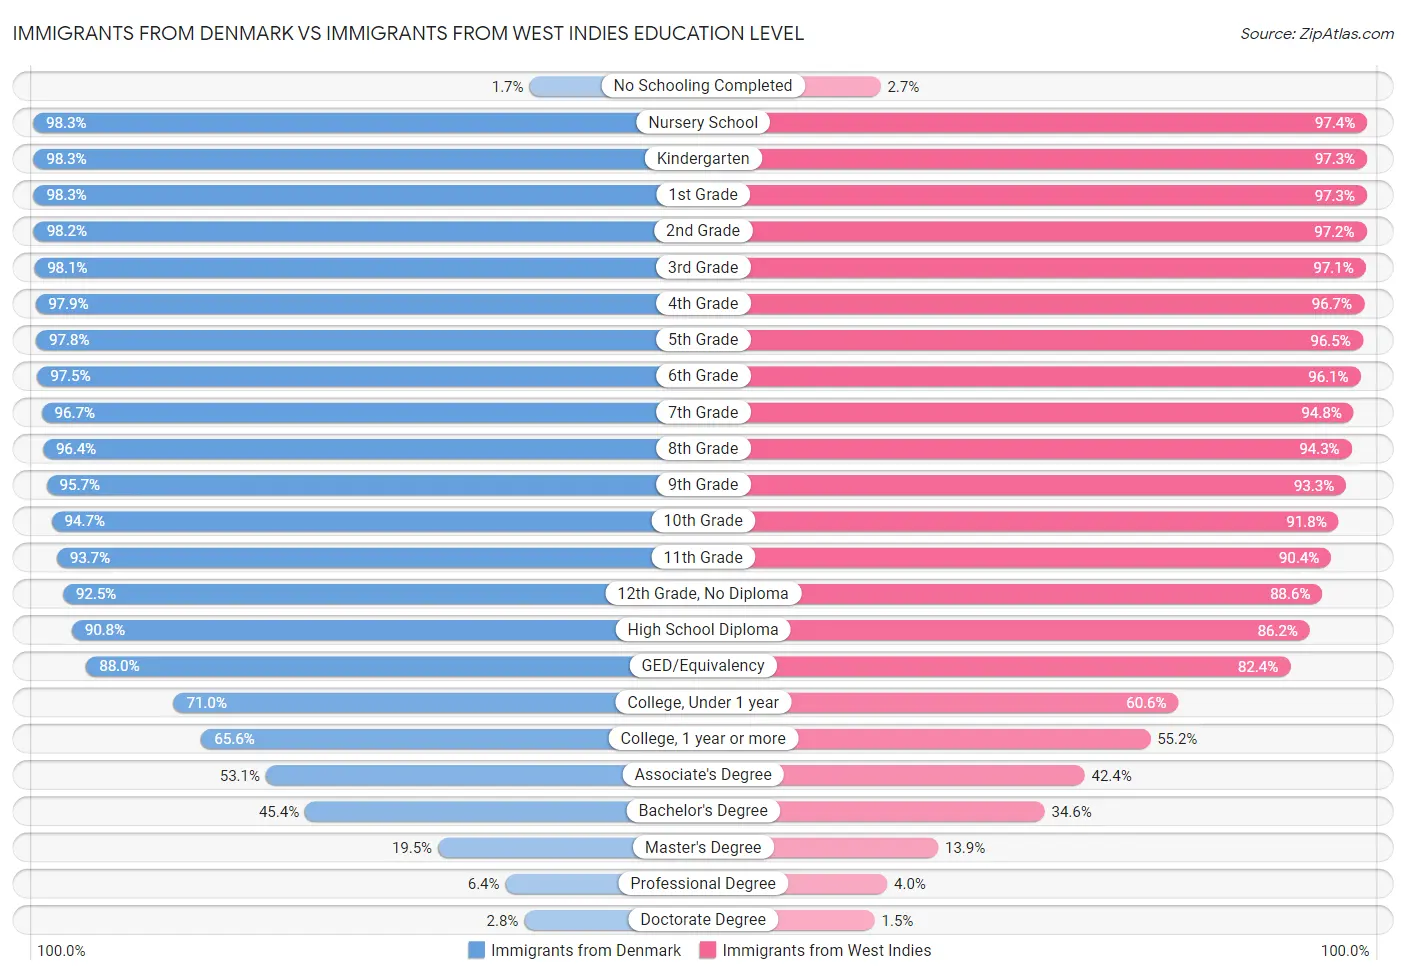 Immigrants from Denmark vs Immigrants from West Indies Education Level